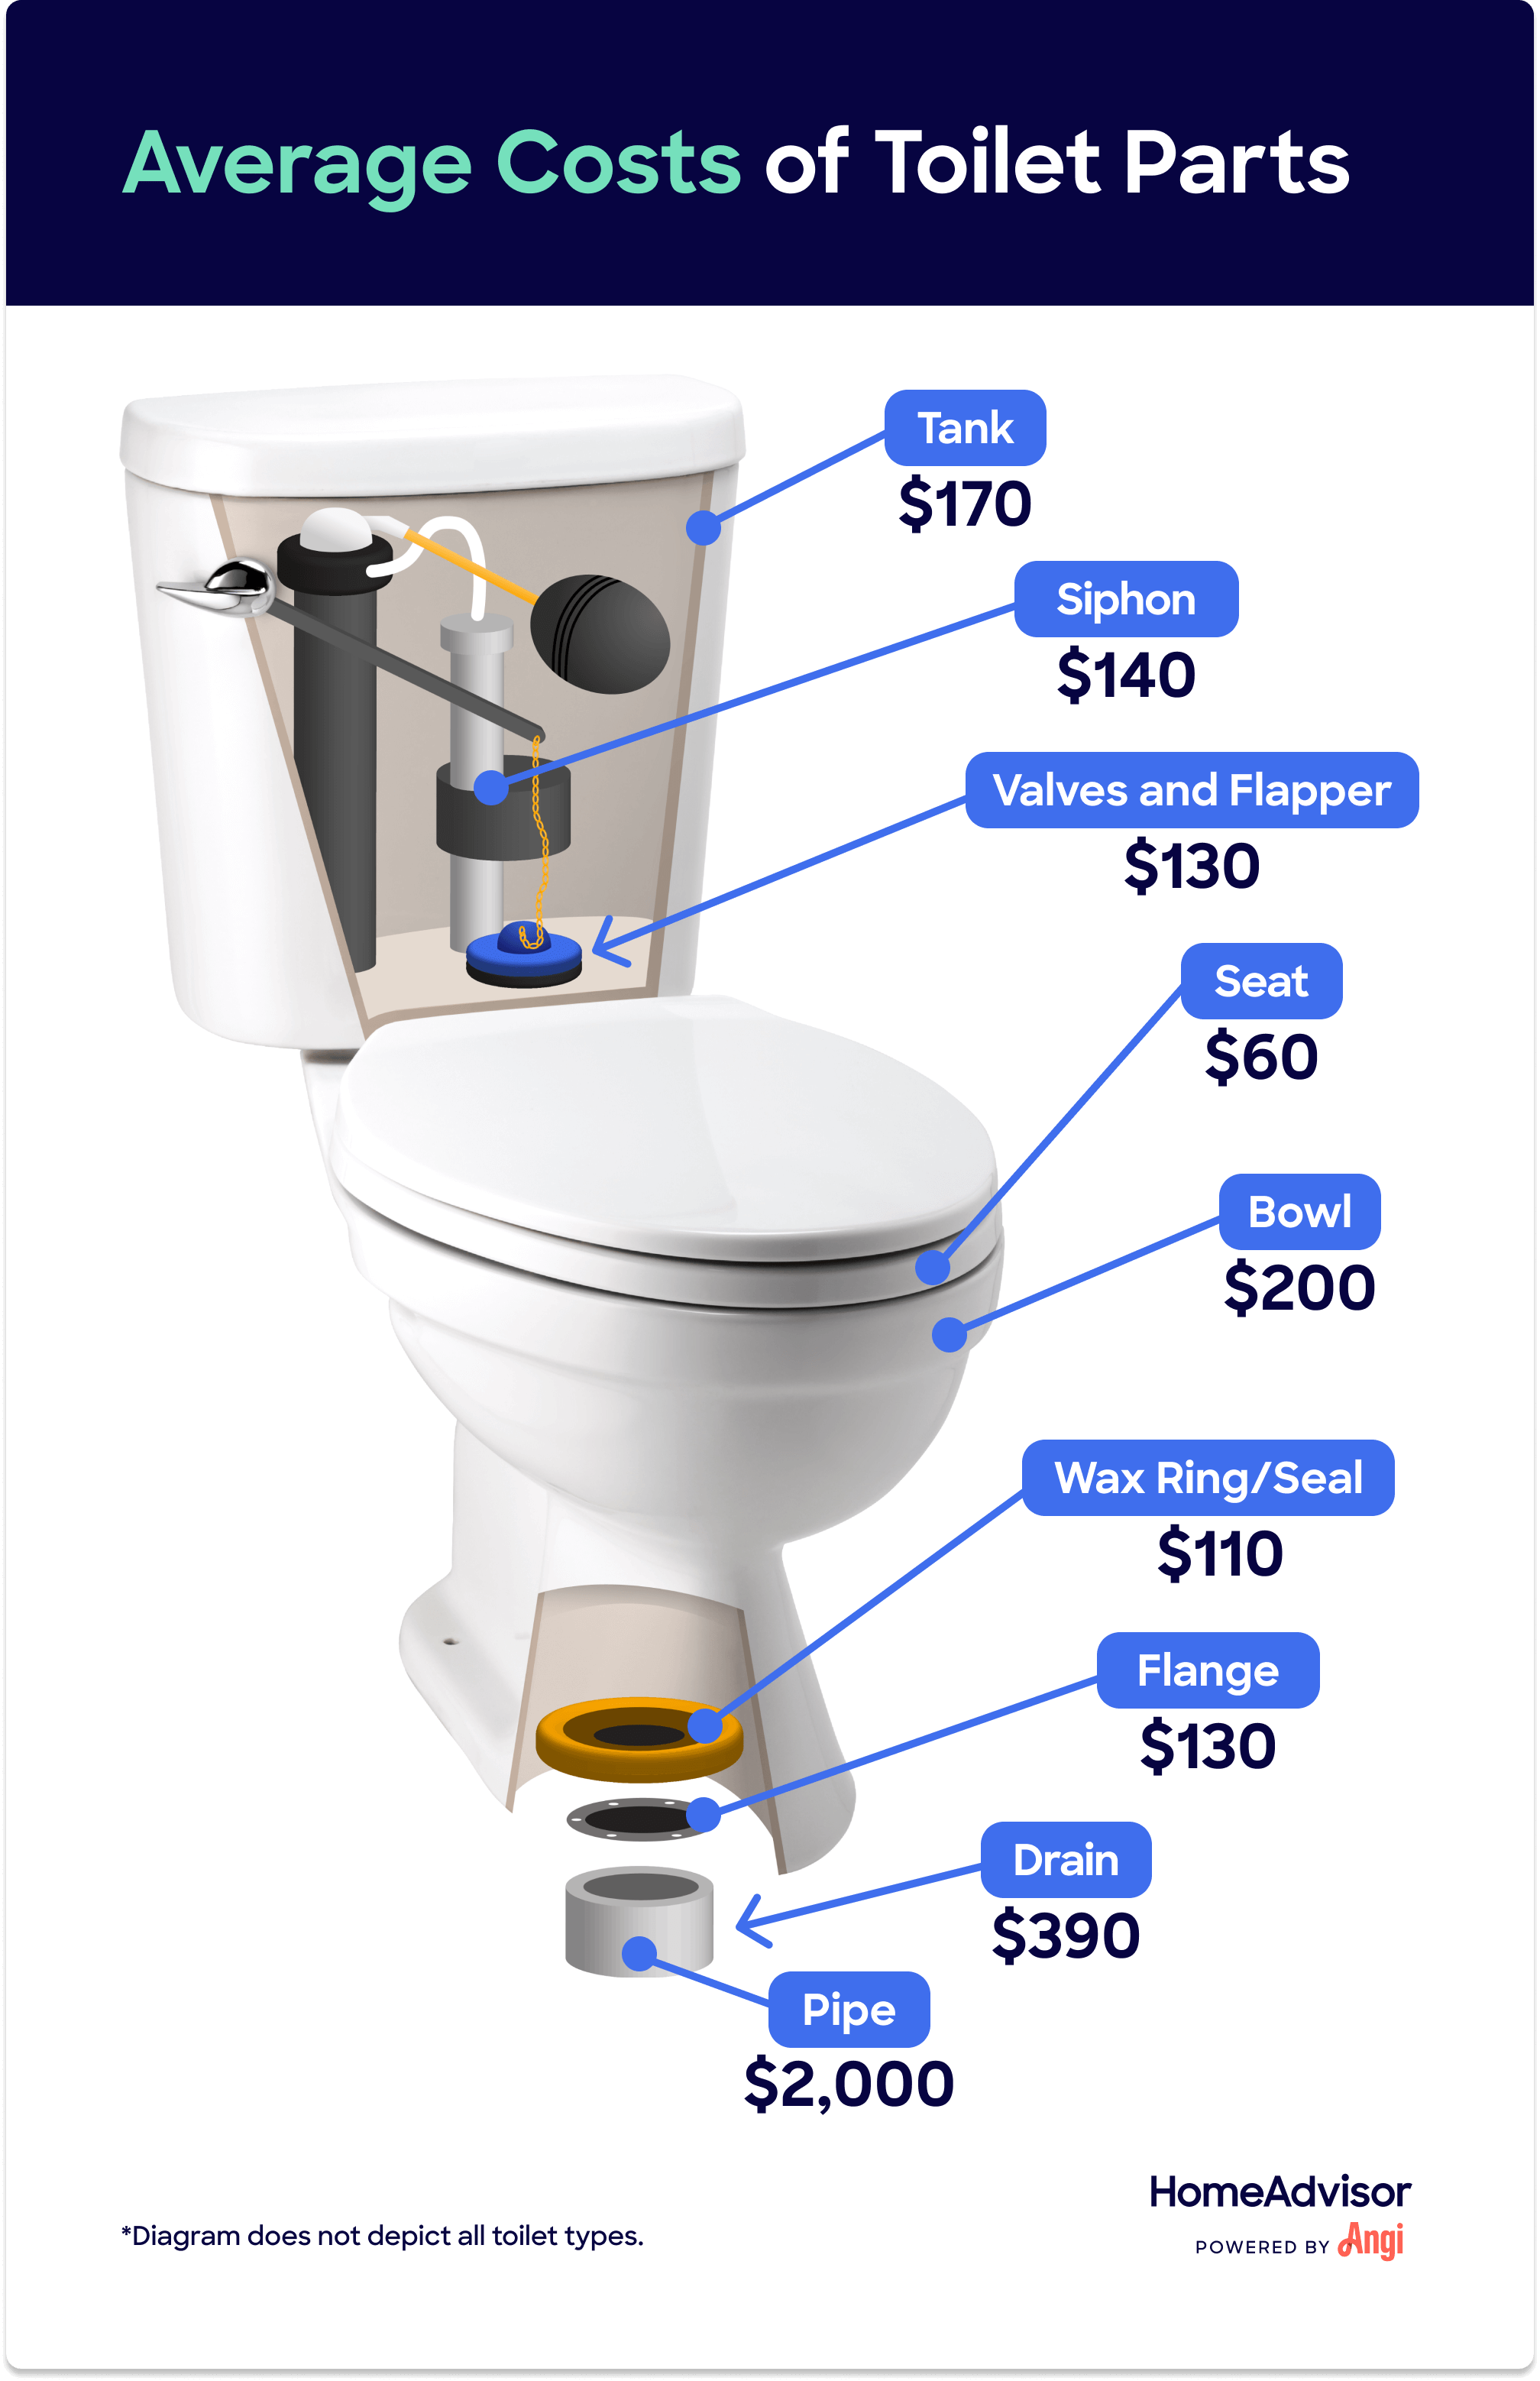 What Are Average Toilet Repair Costs?